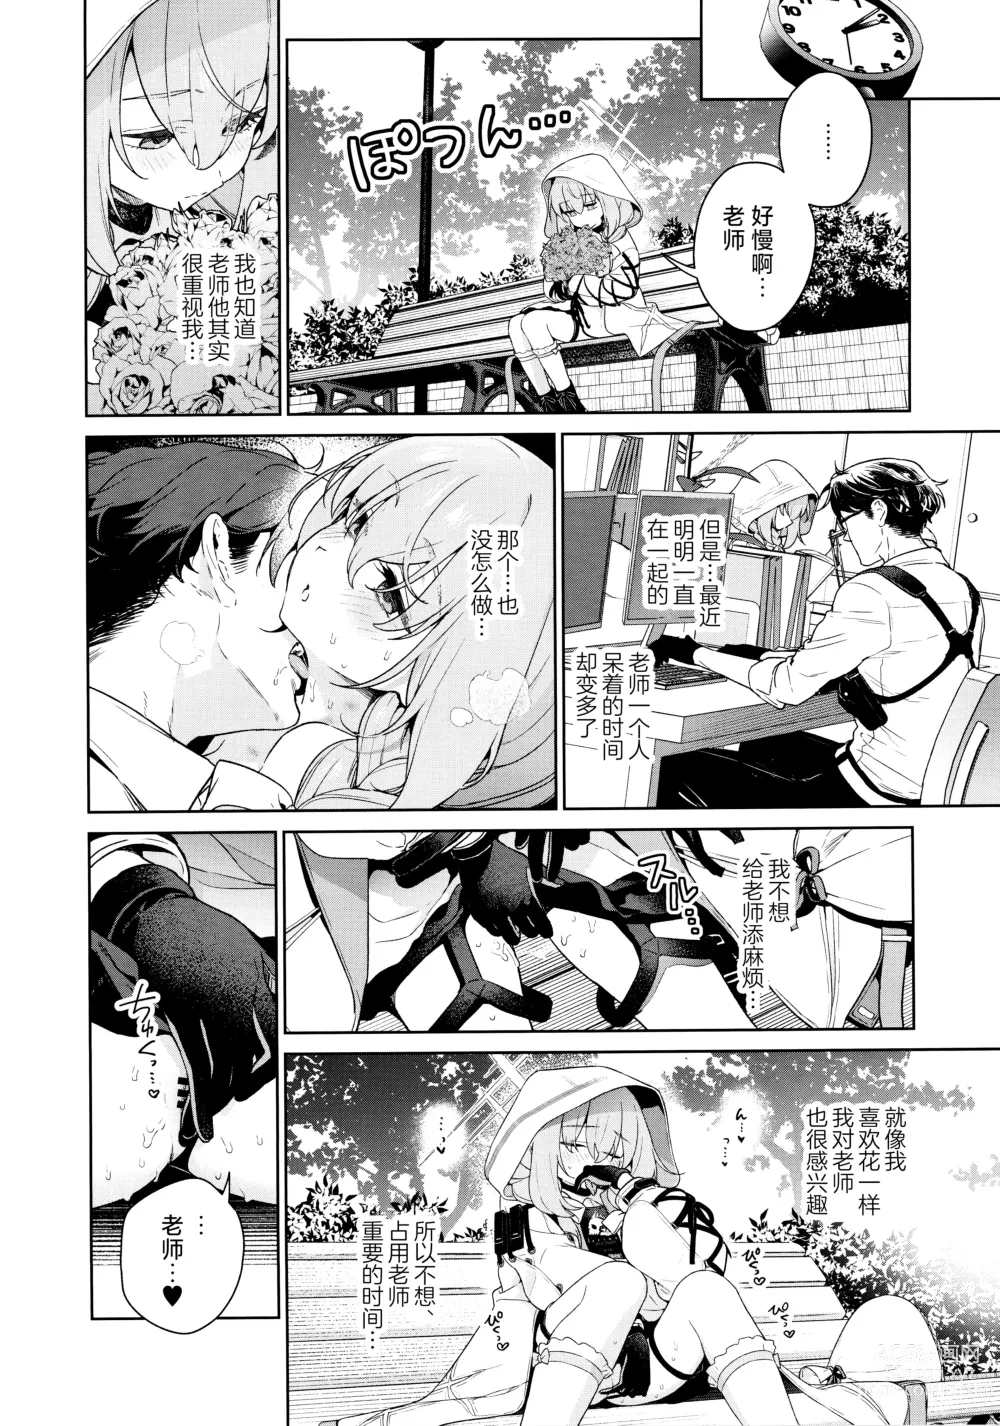 Page 4 of doujinshi 请教(管)教我